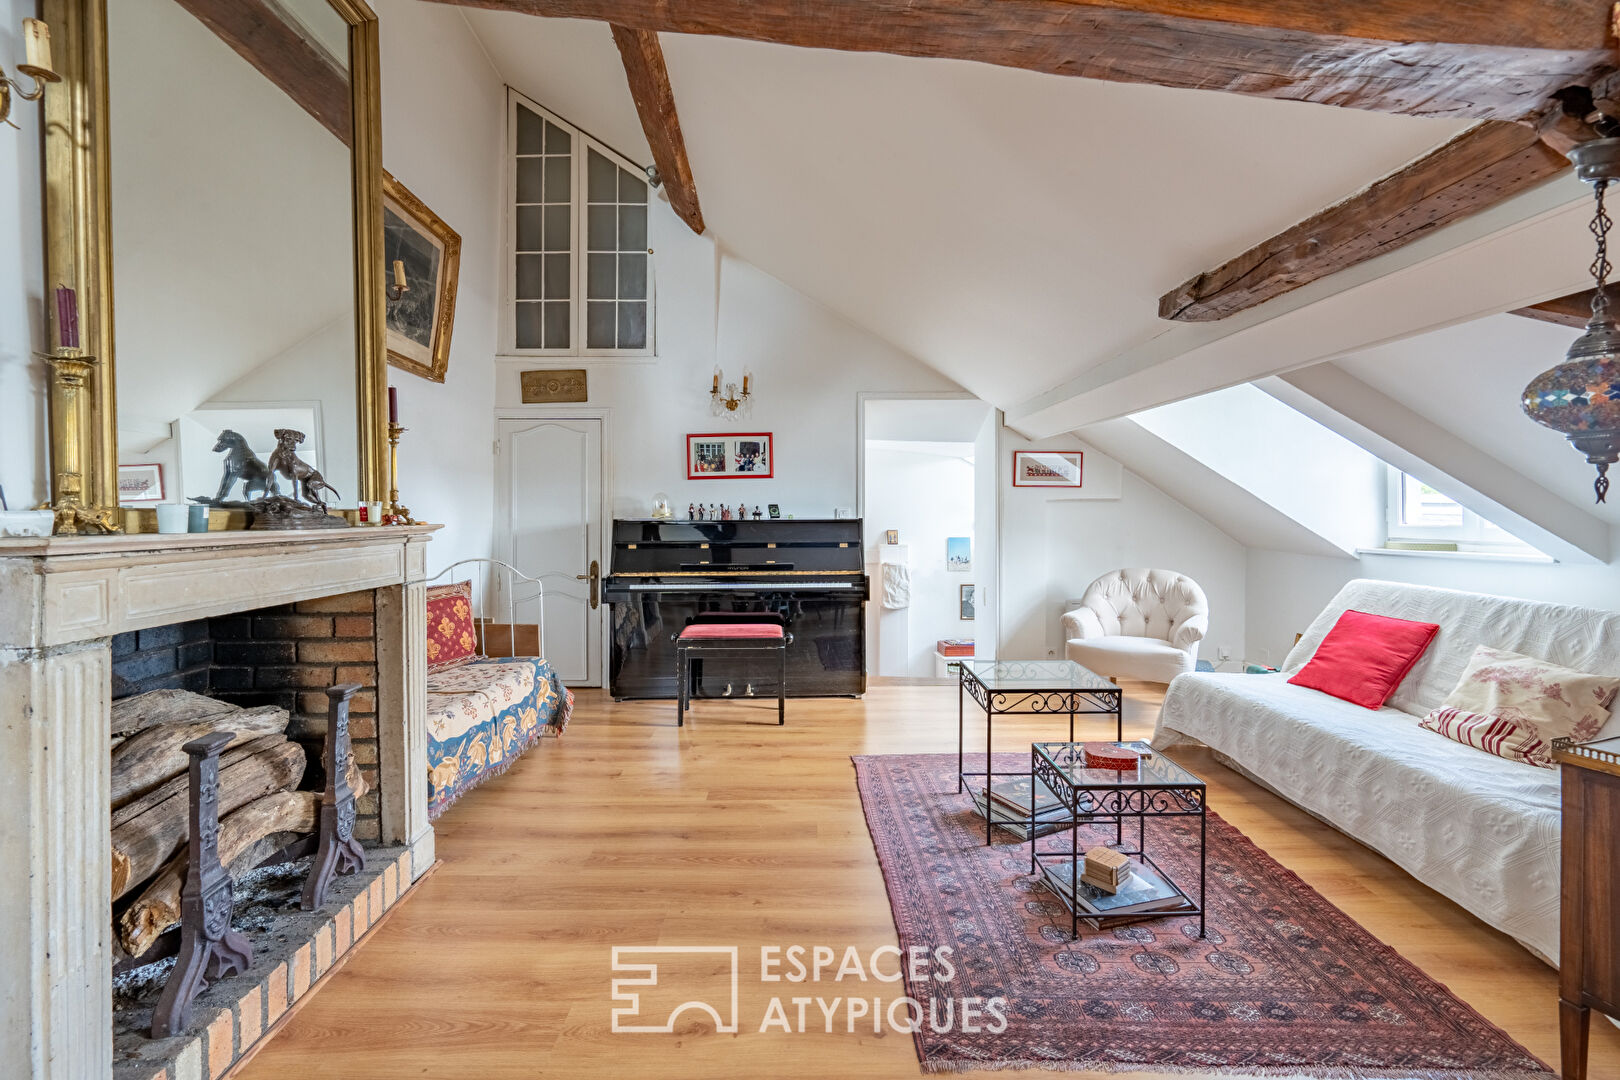 Large atypical family apartment in historic Versailles district